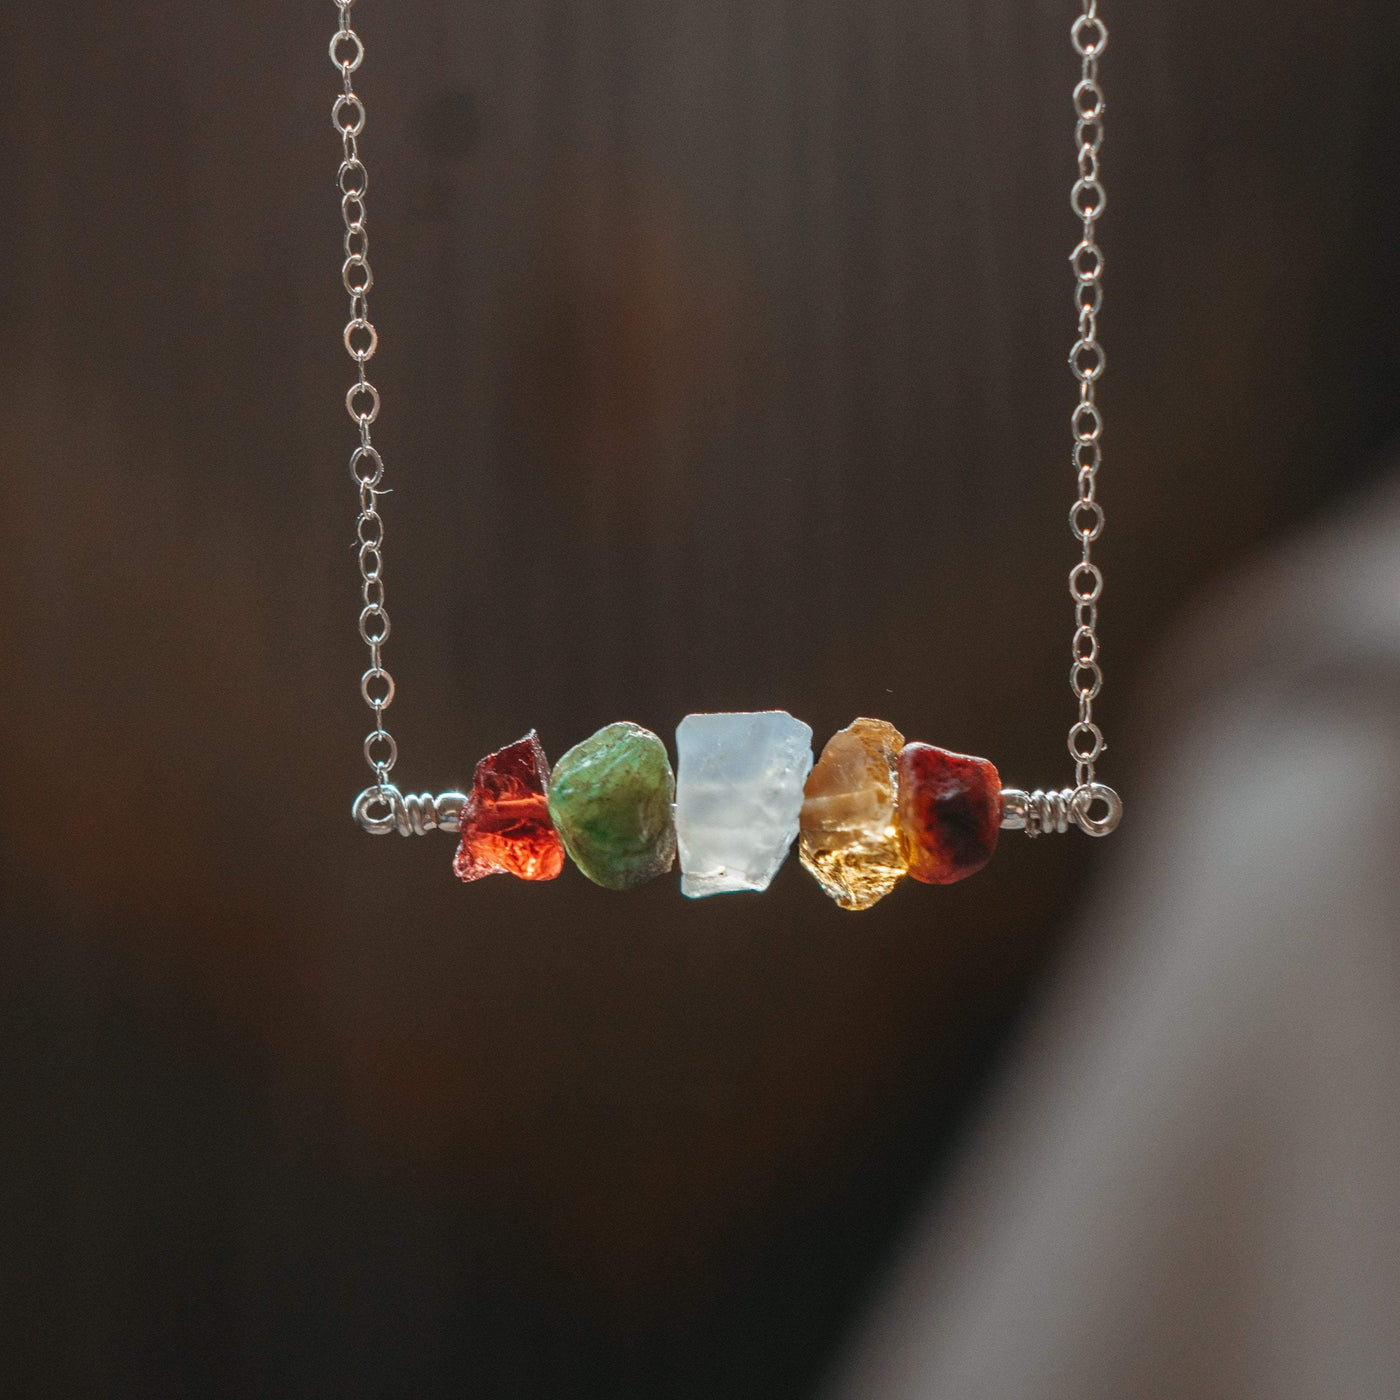 a handmade necklace with five birthstones garnet, emerald, moonstone, citrine, and ruby on sterling silver chain